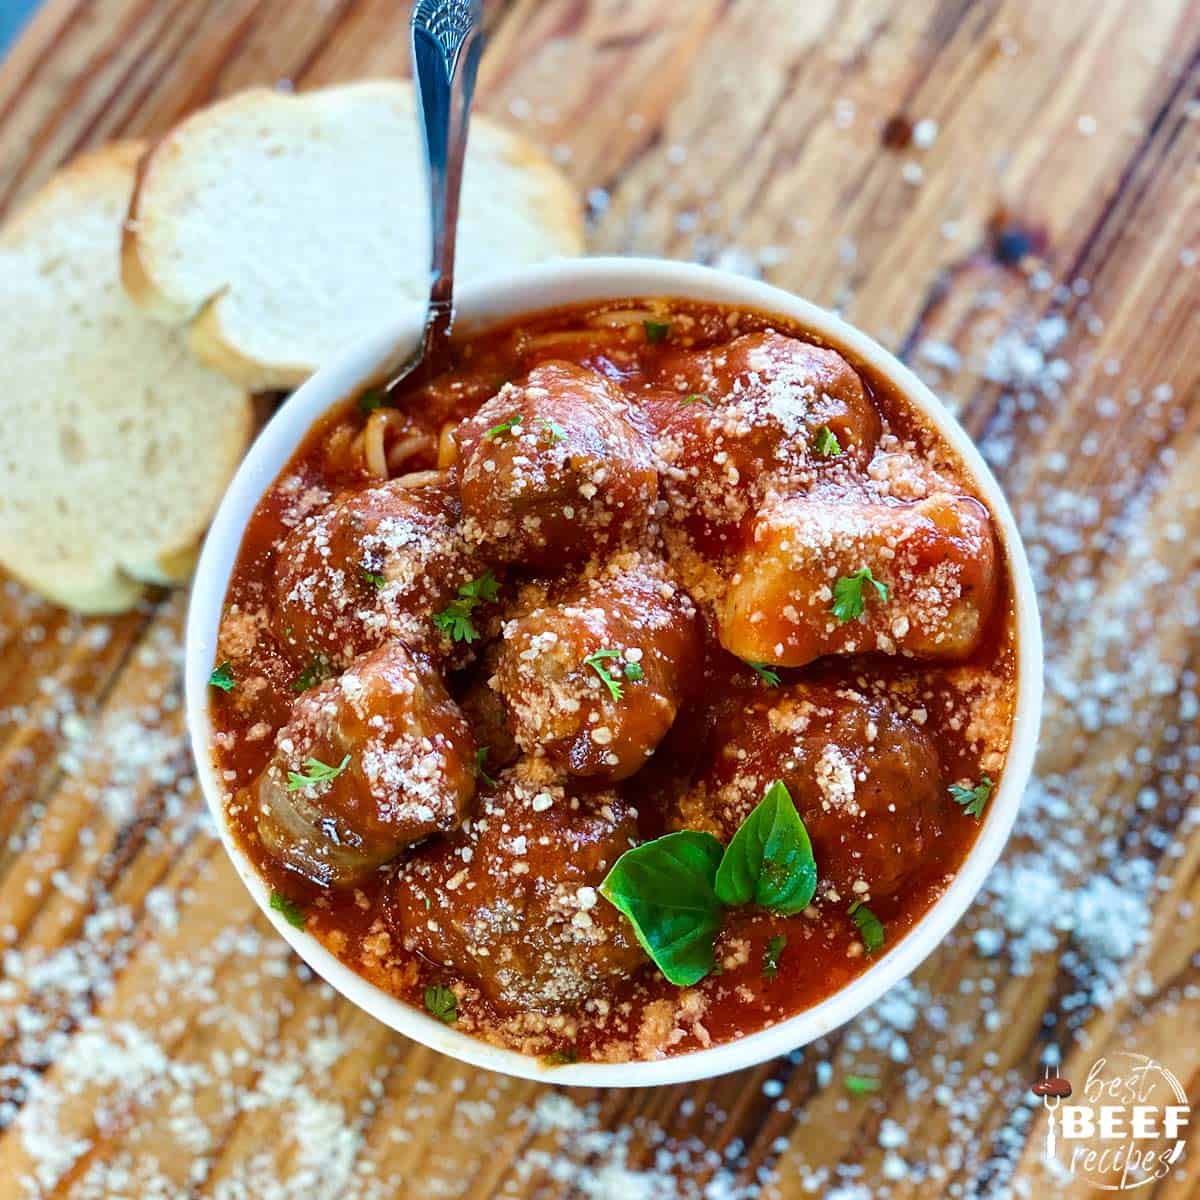 meatball spaghetti suace in a bowl with a fork